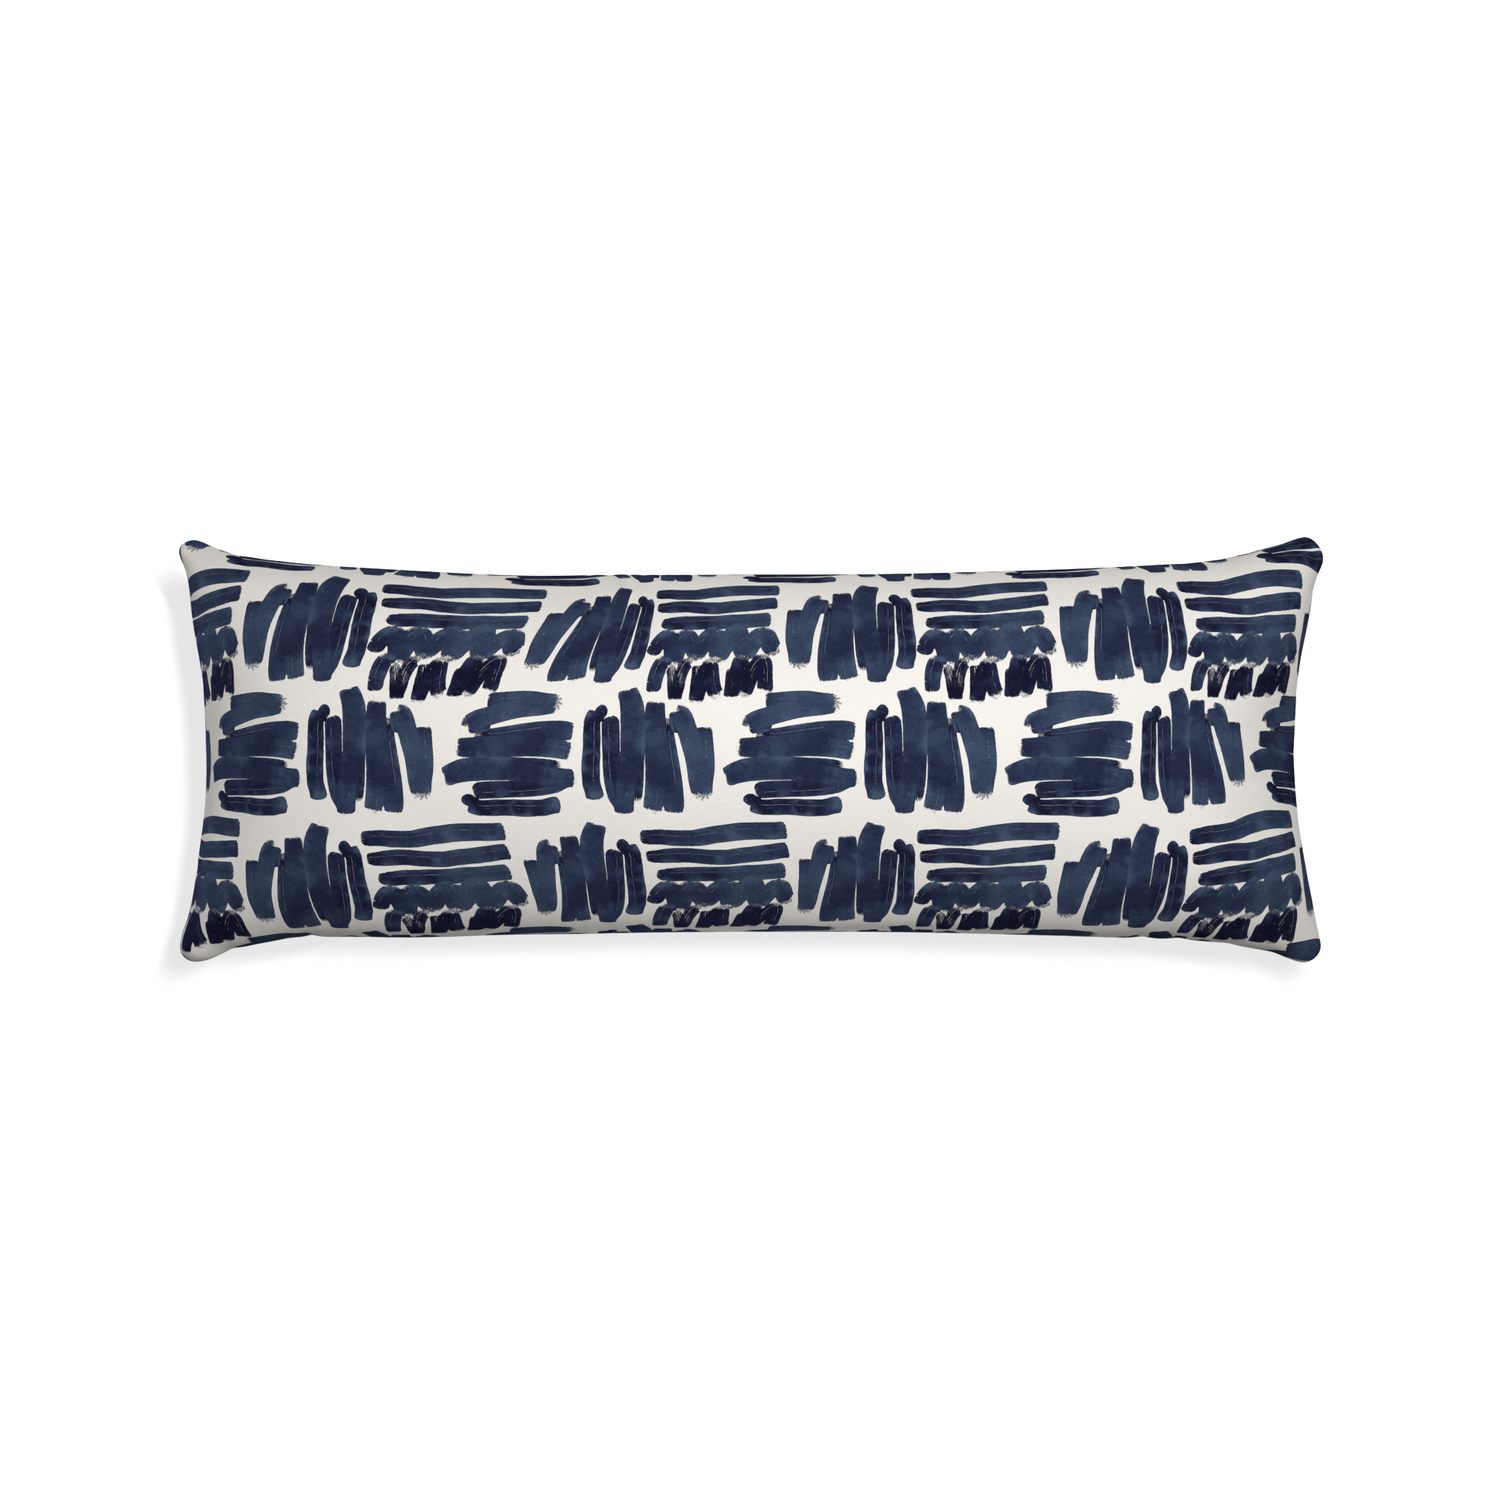 Xl-lumbar warby custom pillow with none on white background